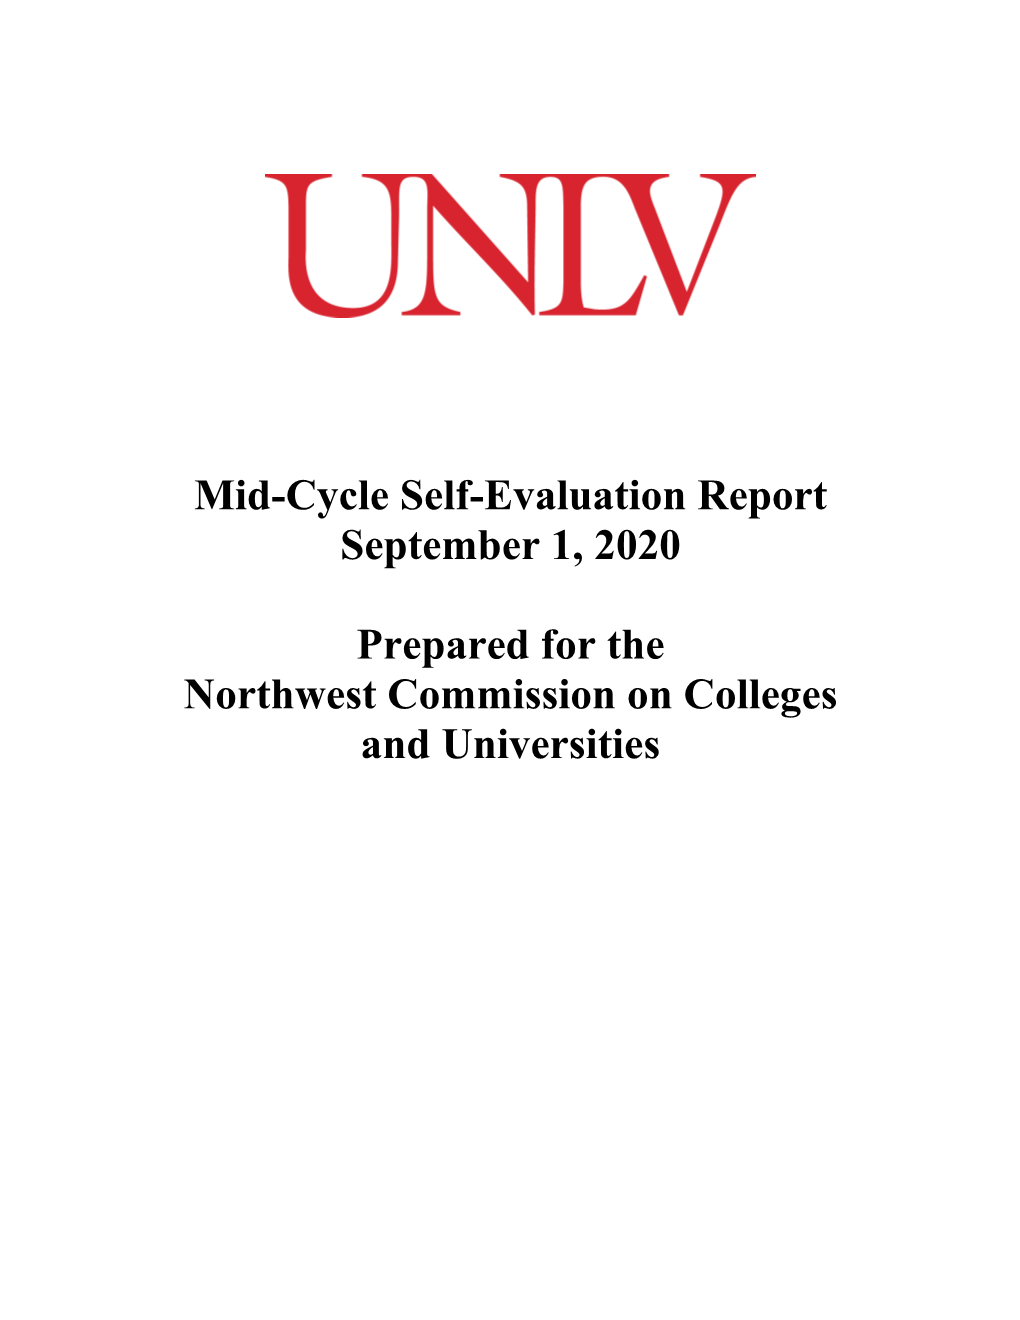 Mid-Cycle Self-Evaluation Report September 1, 2020 Prepared for The